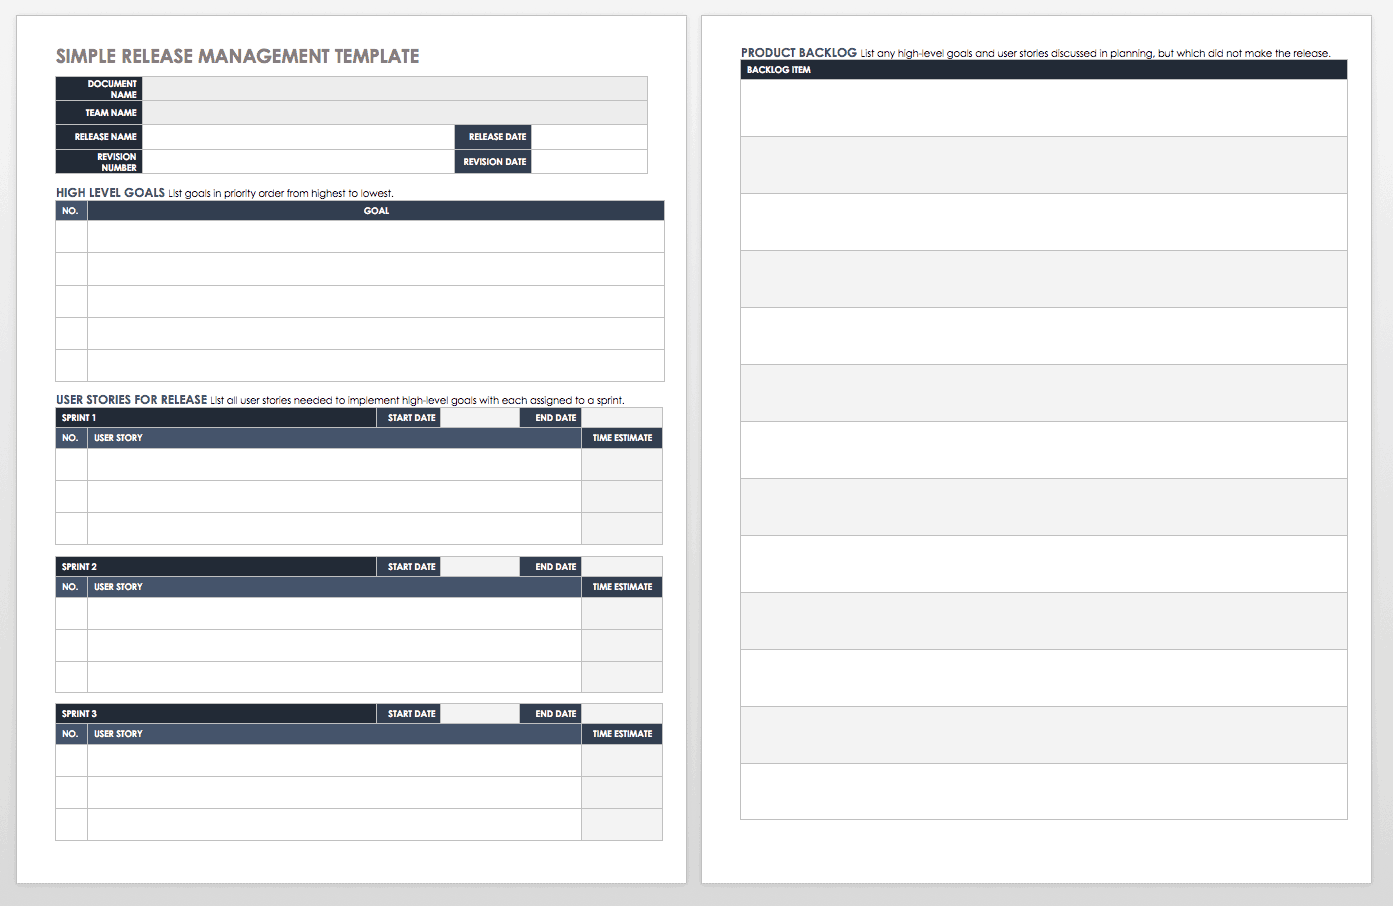 Simple Release Management Template